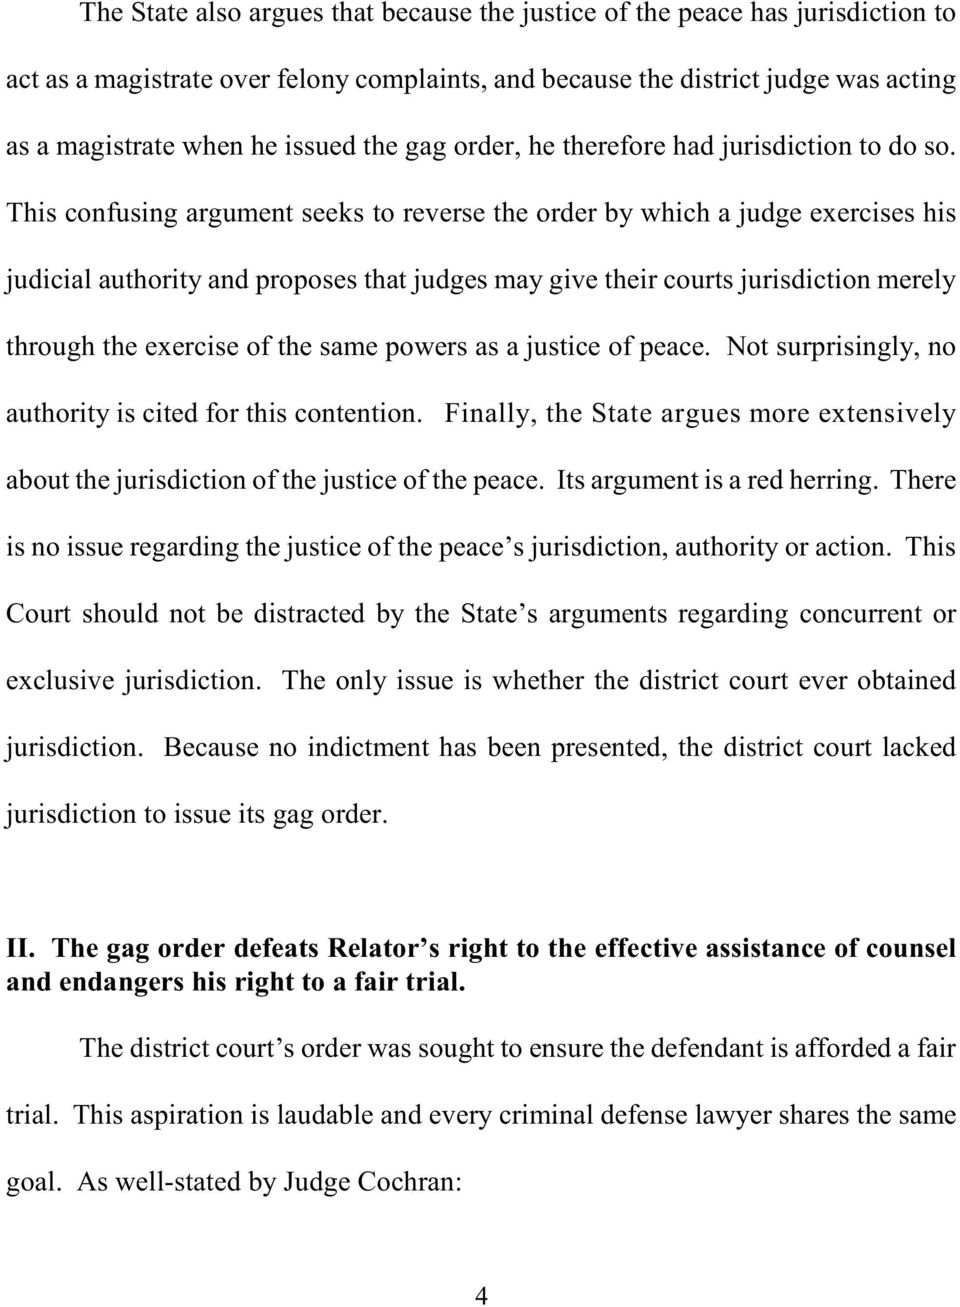 This confusing argument seeks to reverse the order by which a judge exercises his judicial authority and proposes that judges may give their courts jurisdiction merely through the exercise of the